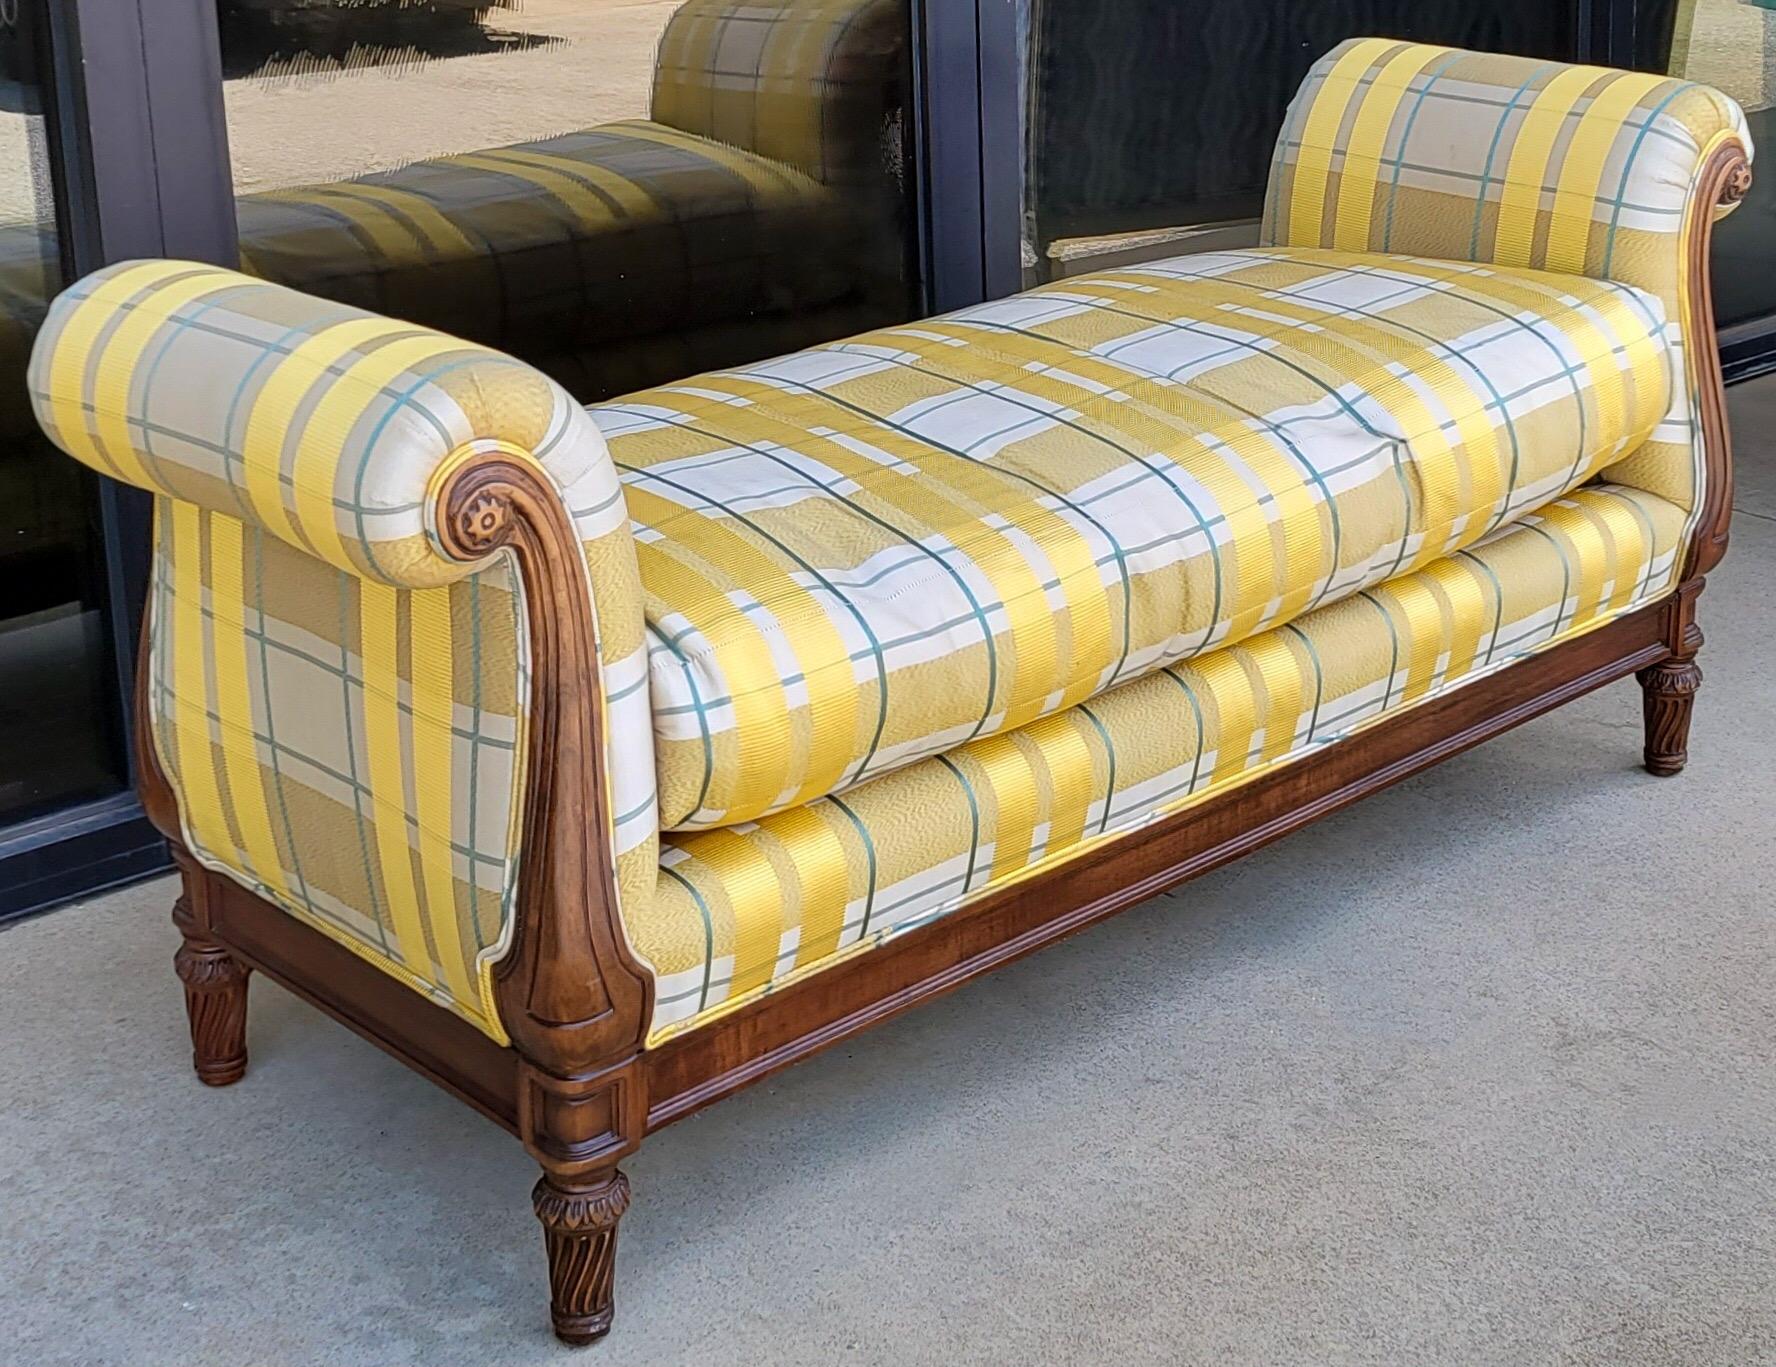 American Late 20th-C. Regency Style Mahogany Upholstered Daybed / Bench / Chaise